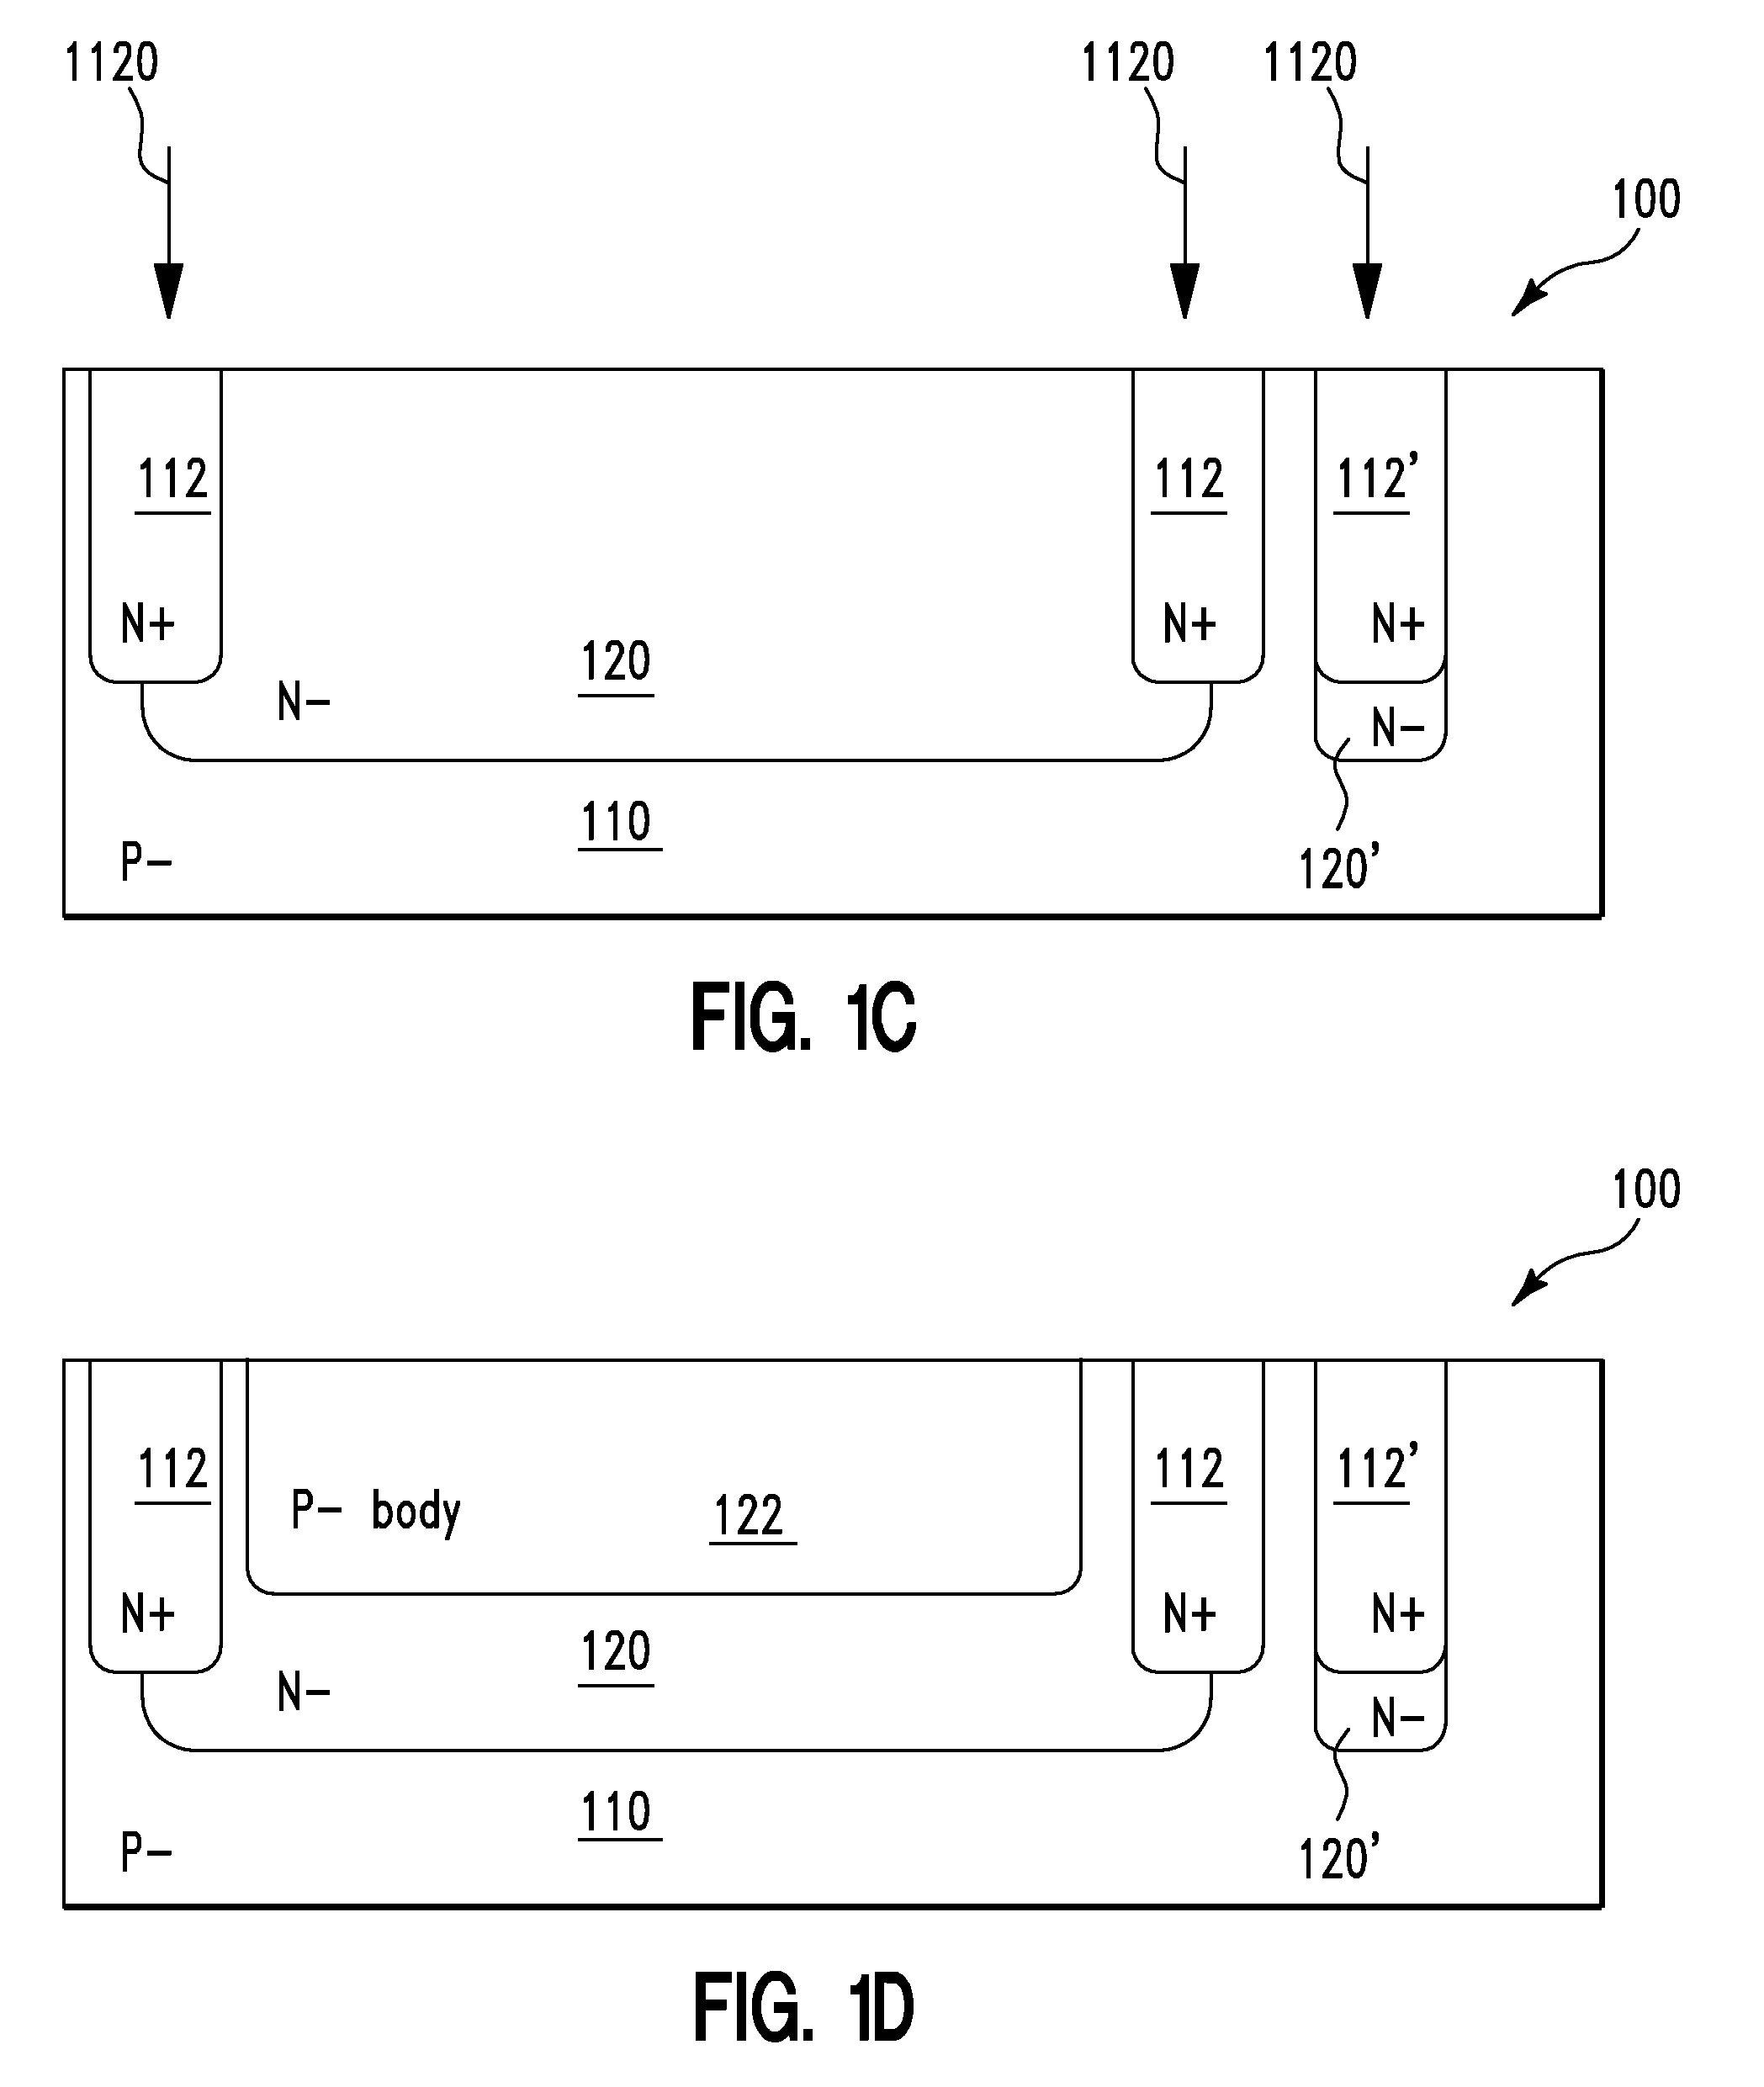 Guard ring structures for high voltage  CMOS/low voltage CMOS technology using ldmos (lateral double-diffused metal oxide semiconductor) device fabrication